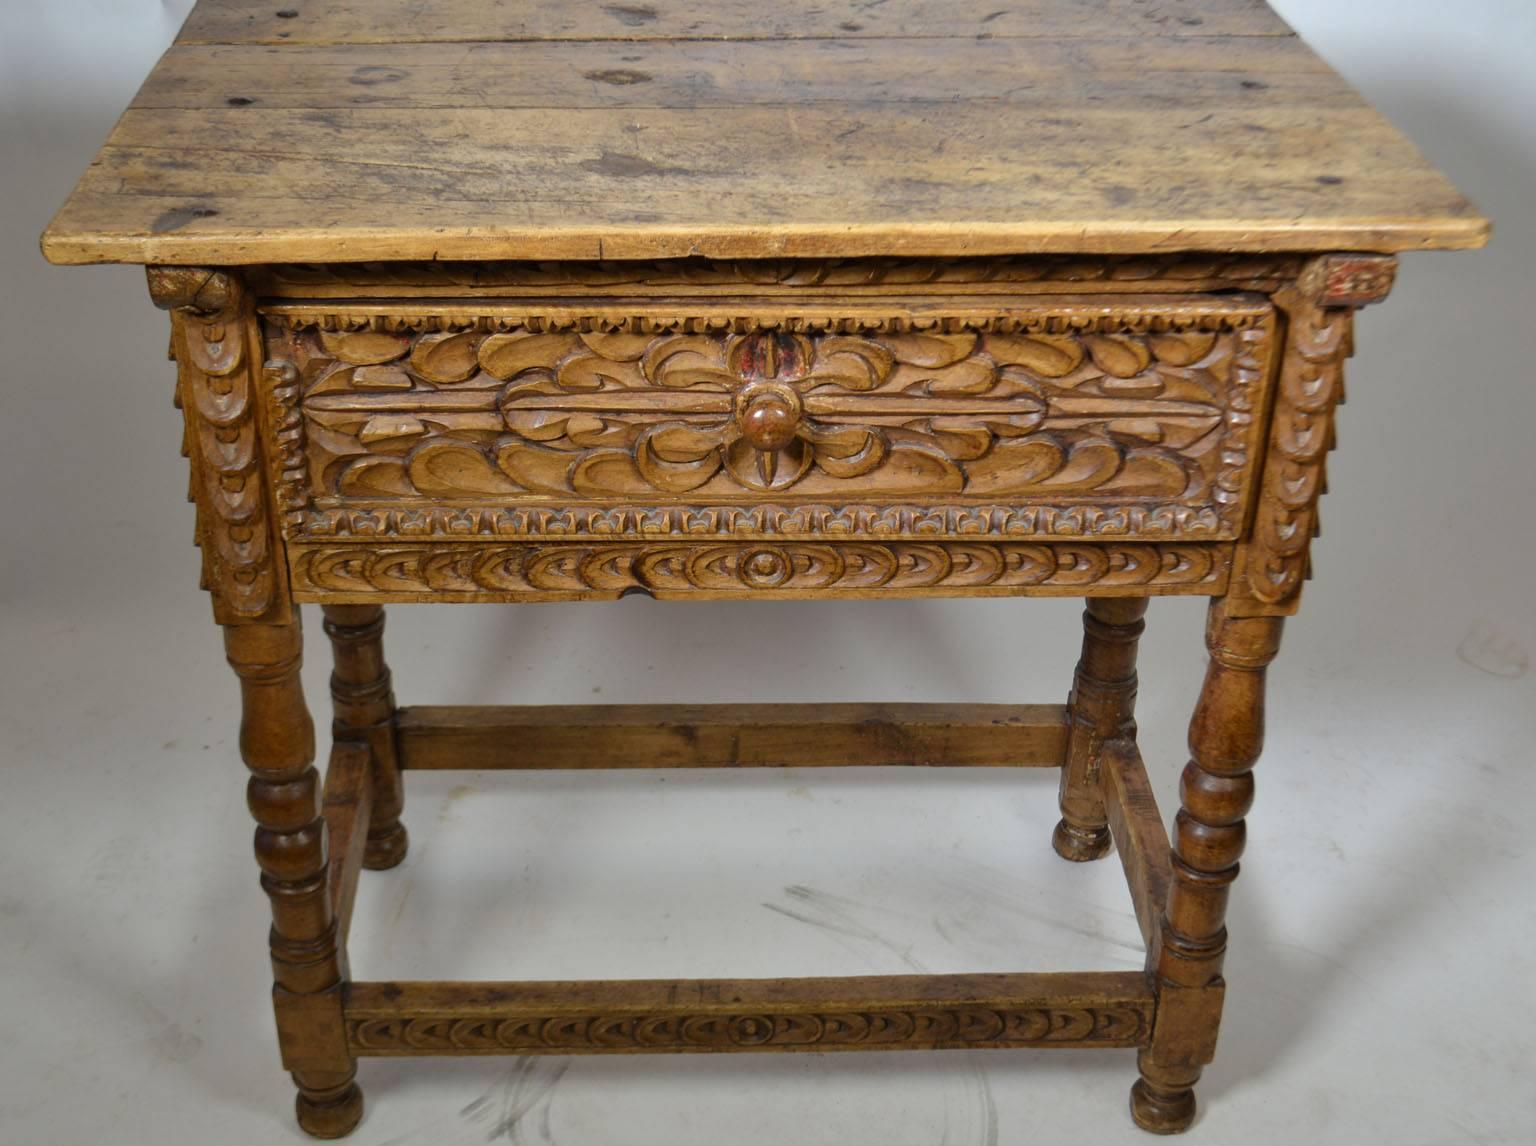 18th century Spanish Colonial side table with central drawer, turned legs, fish tail carving surrounding typical Spanish carved rosettes, a beautiful planked top, resting on an square stretcher and ball feet, Peru.